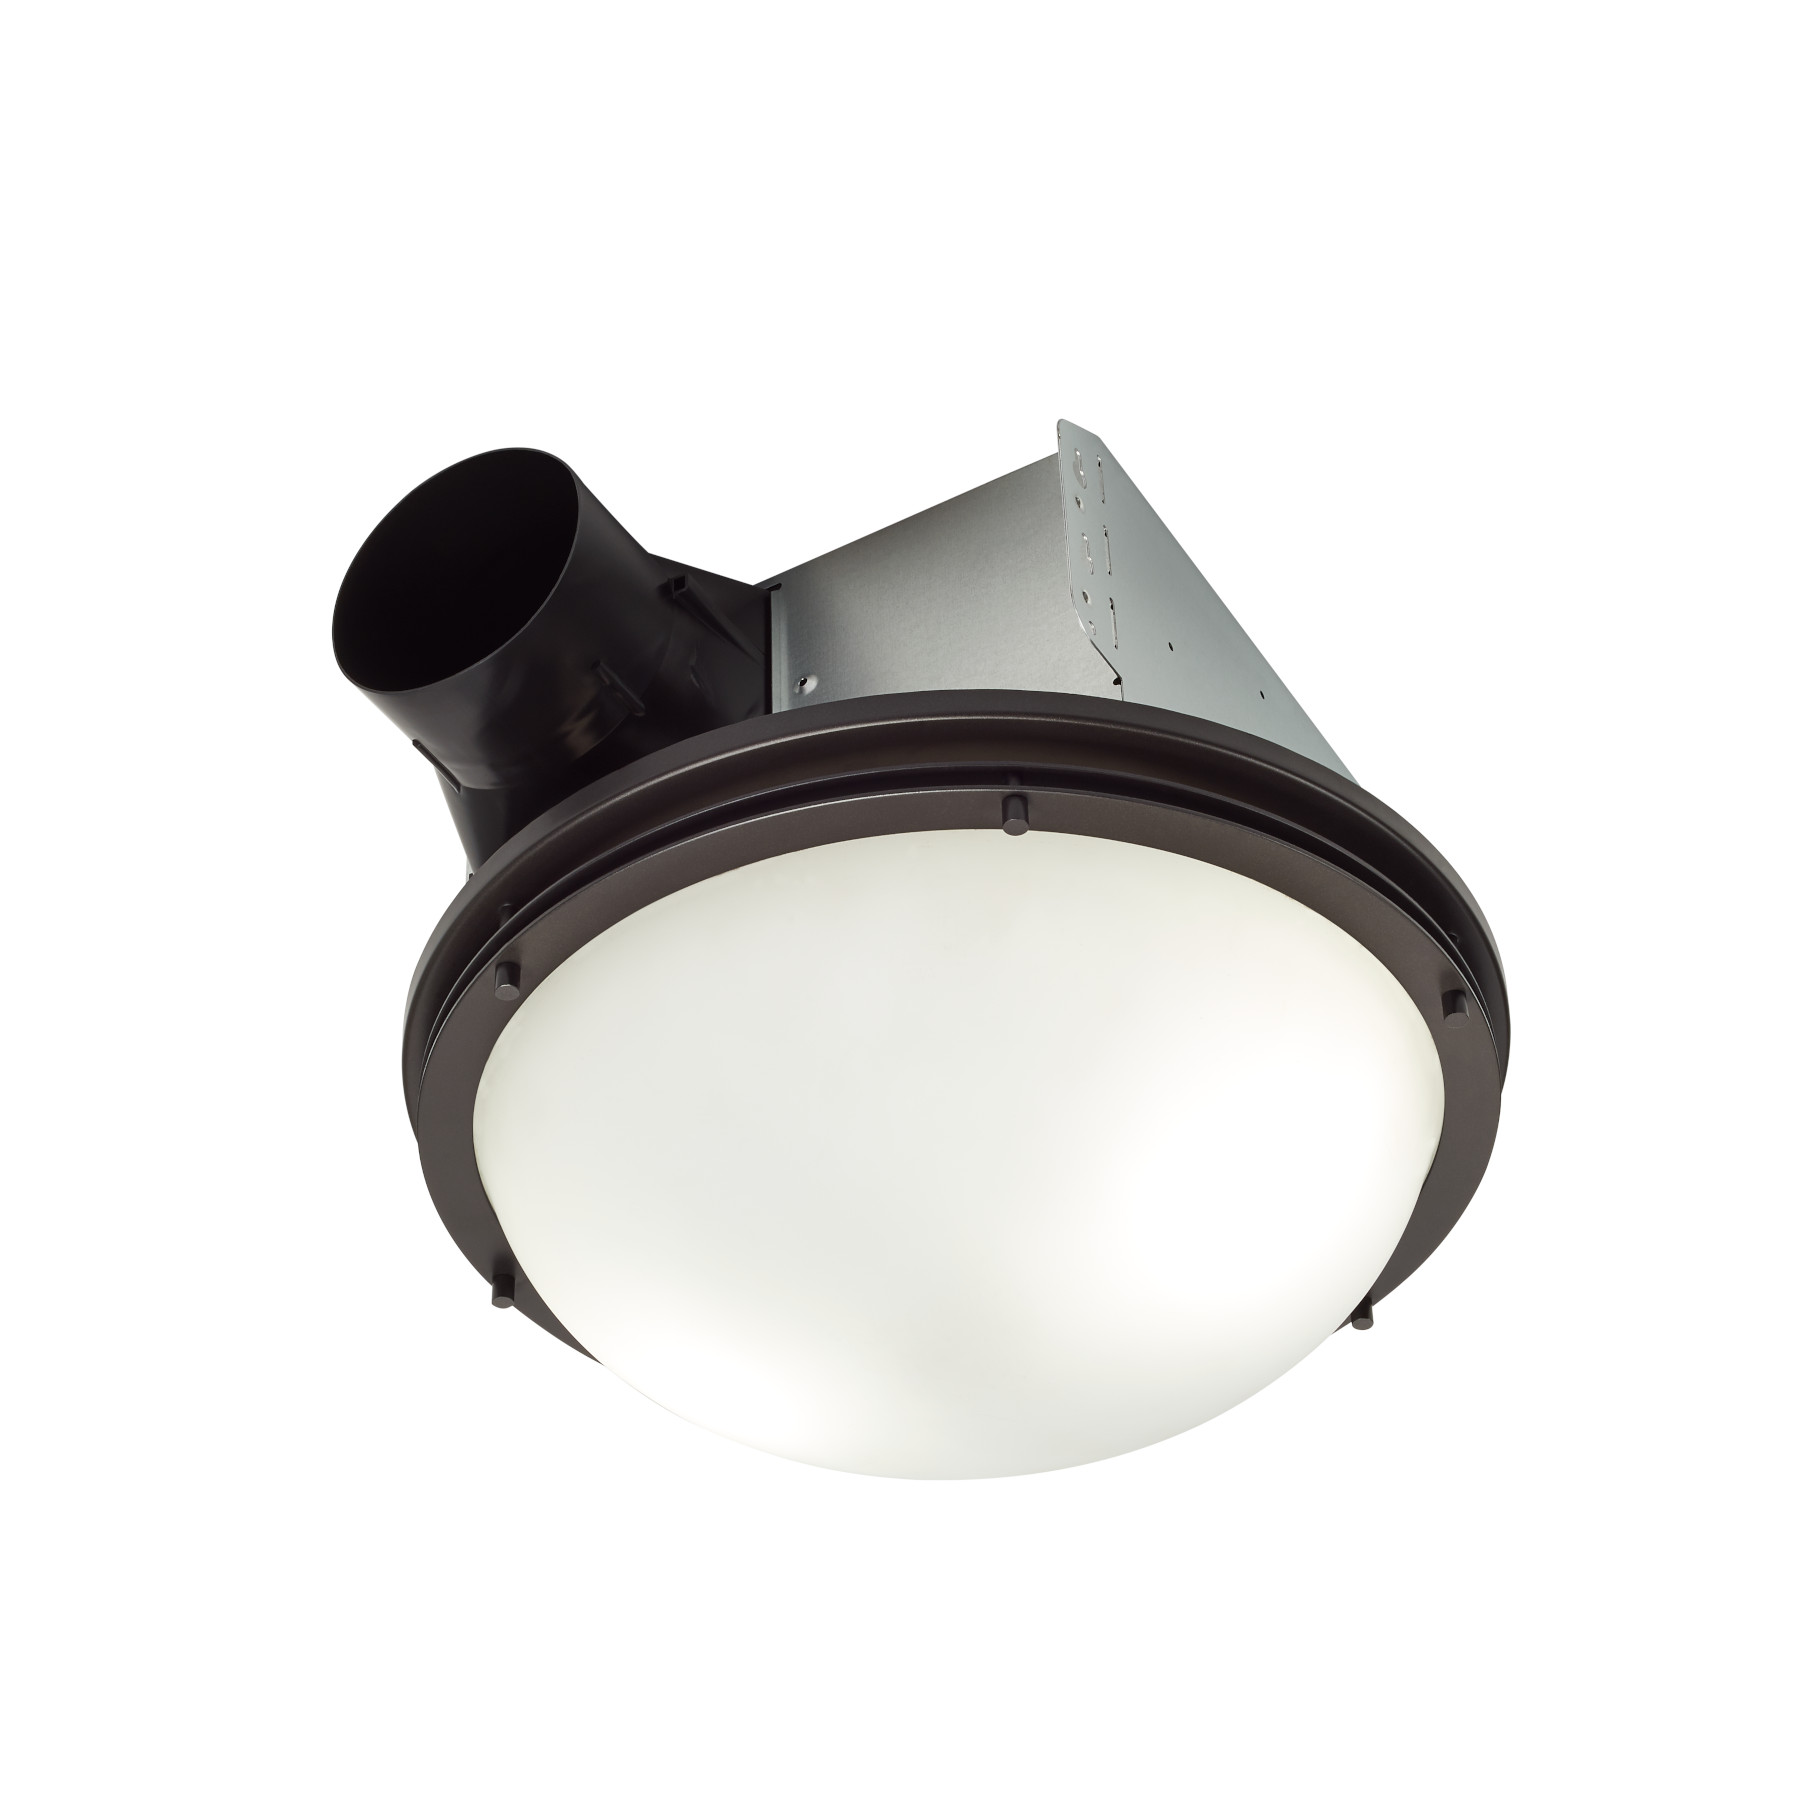 DISCONTINUED: Decorative Oil-Rubbed Bronze 80 CFM  Roomside Installation Bathroom Exhaust Fan w/ Light and White Globe